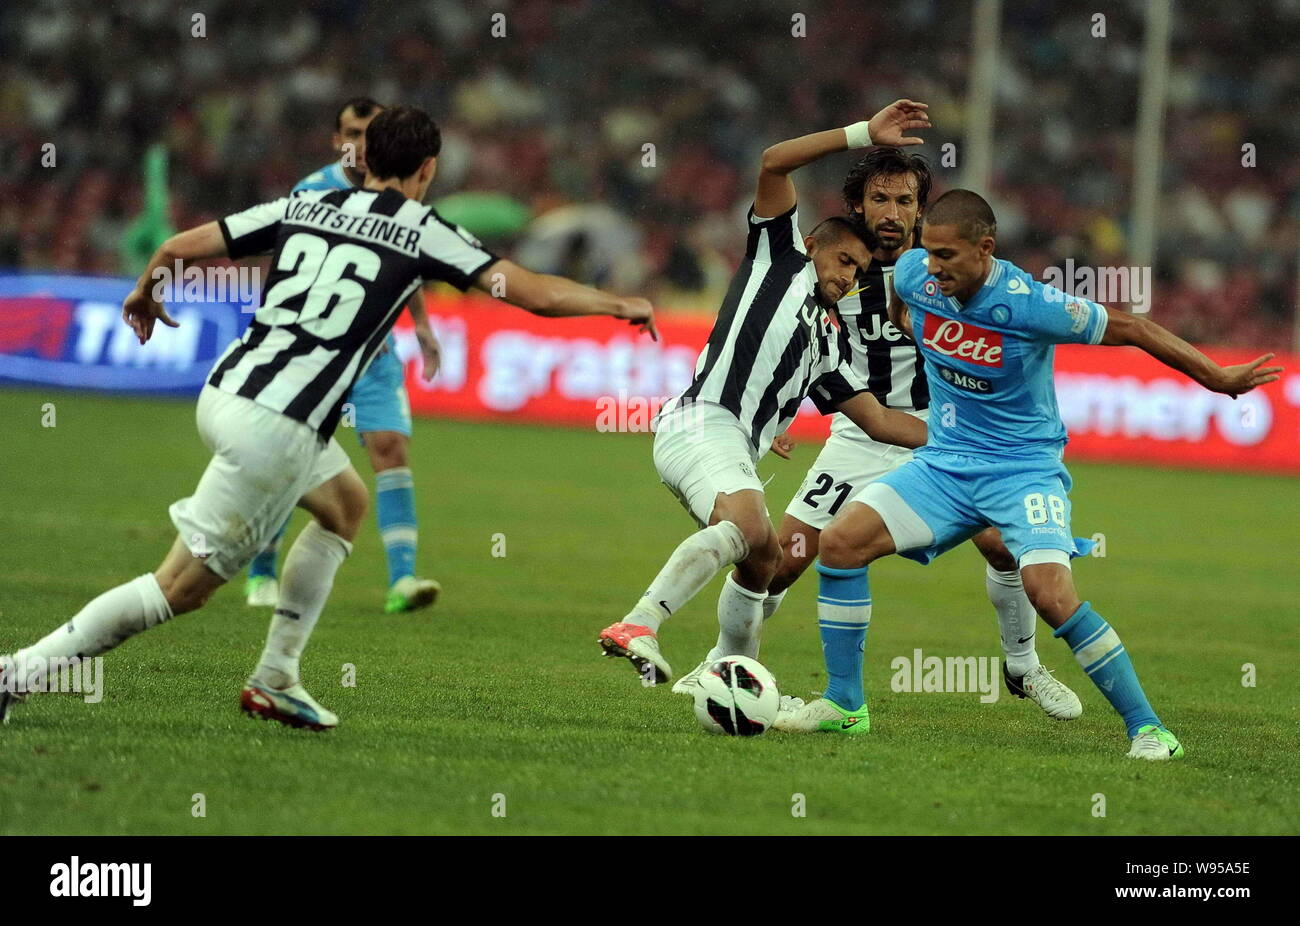 Gokhan Inler of Napoli, right, challenges players of Juventus during their Italian Super Cup football match at the National Stadium, also known as the Stock Photo